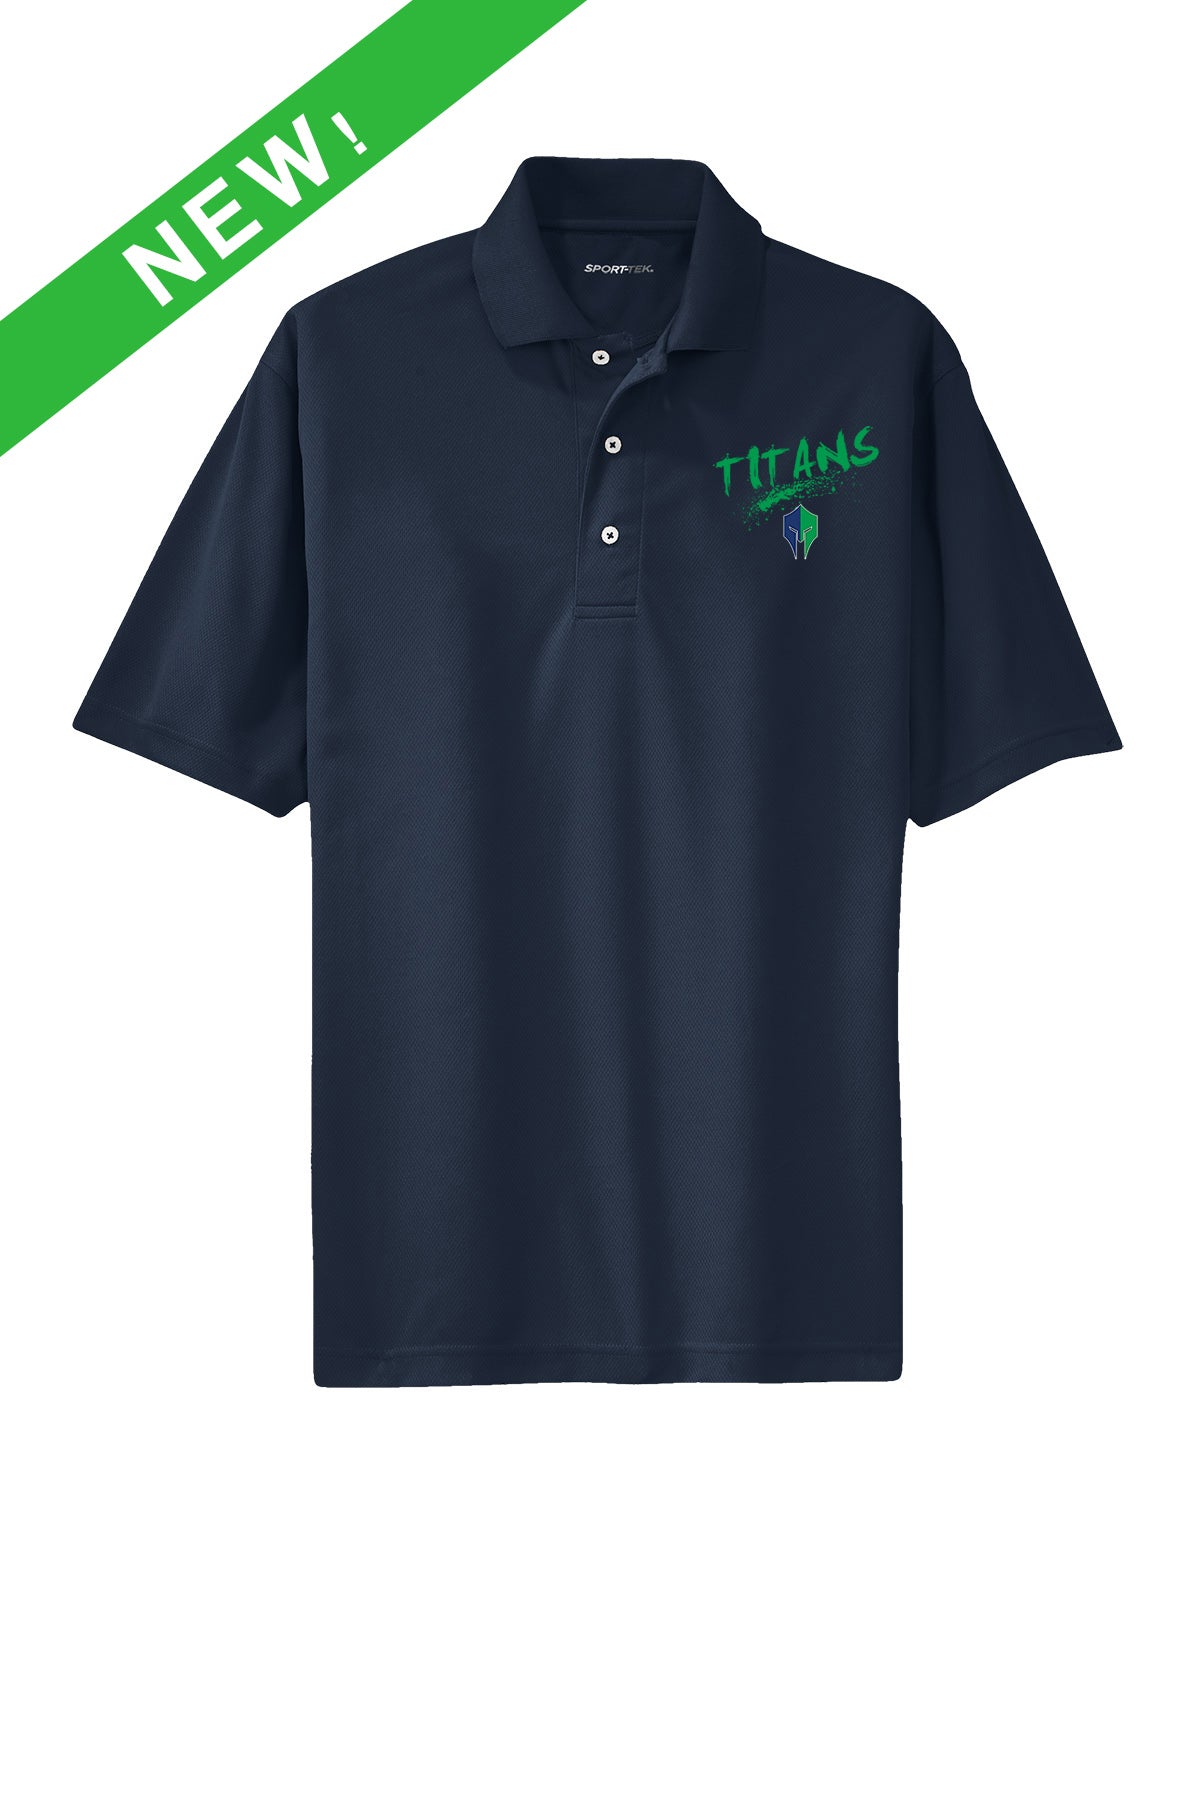 Titans Polo "300" - K469 (color options available)